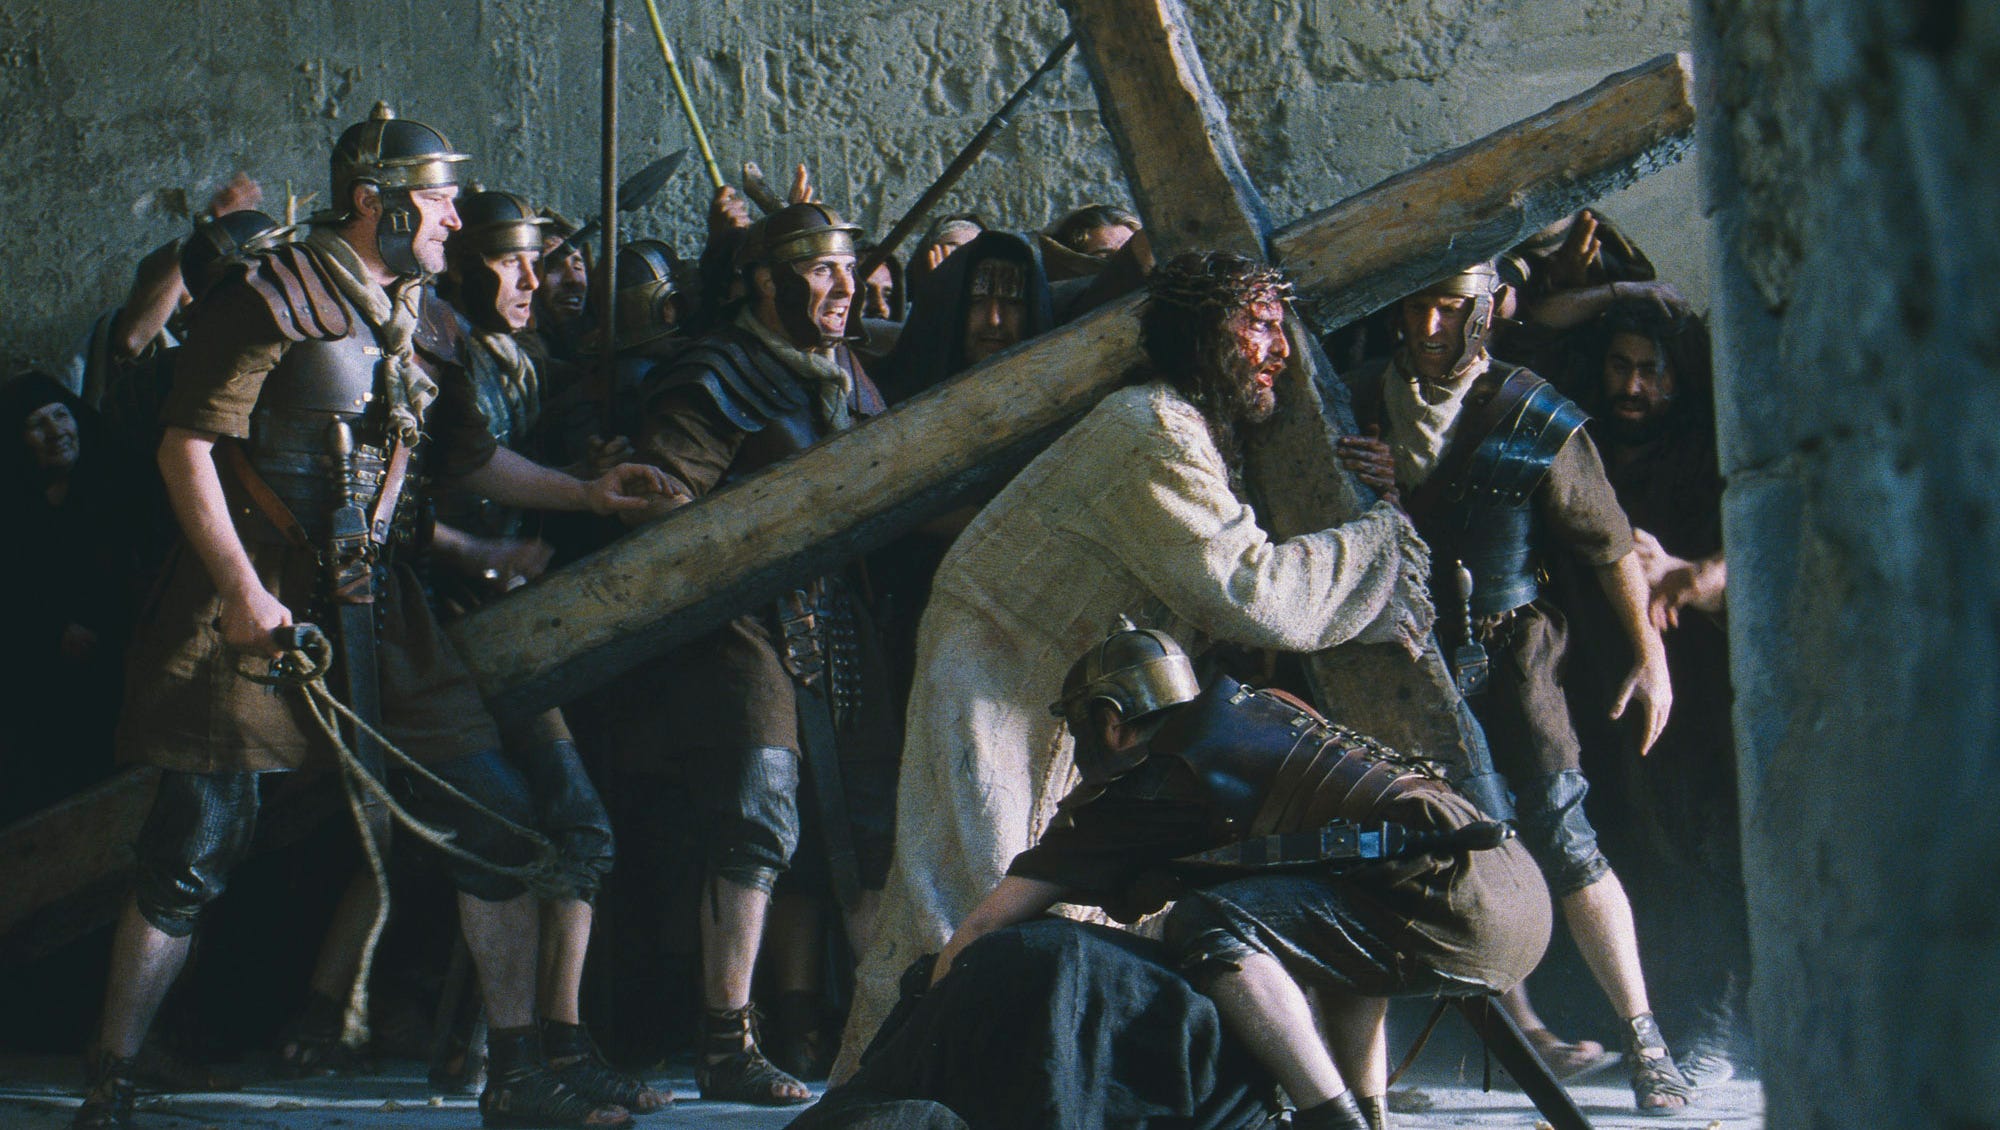 Jim Caviezel Passion Of The Christ Sequel Will Be Biggest Film Ever